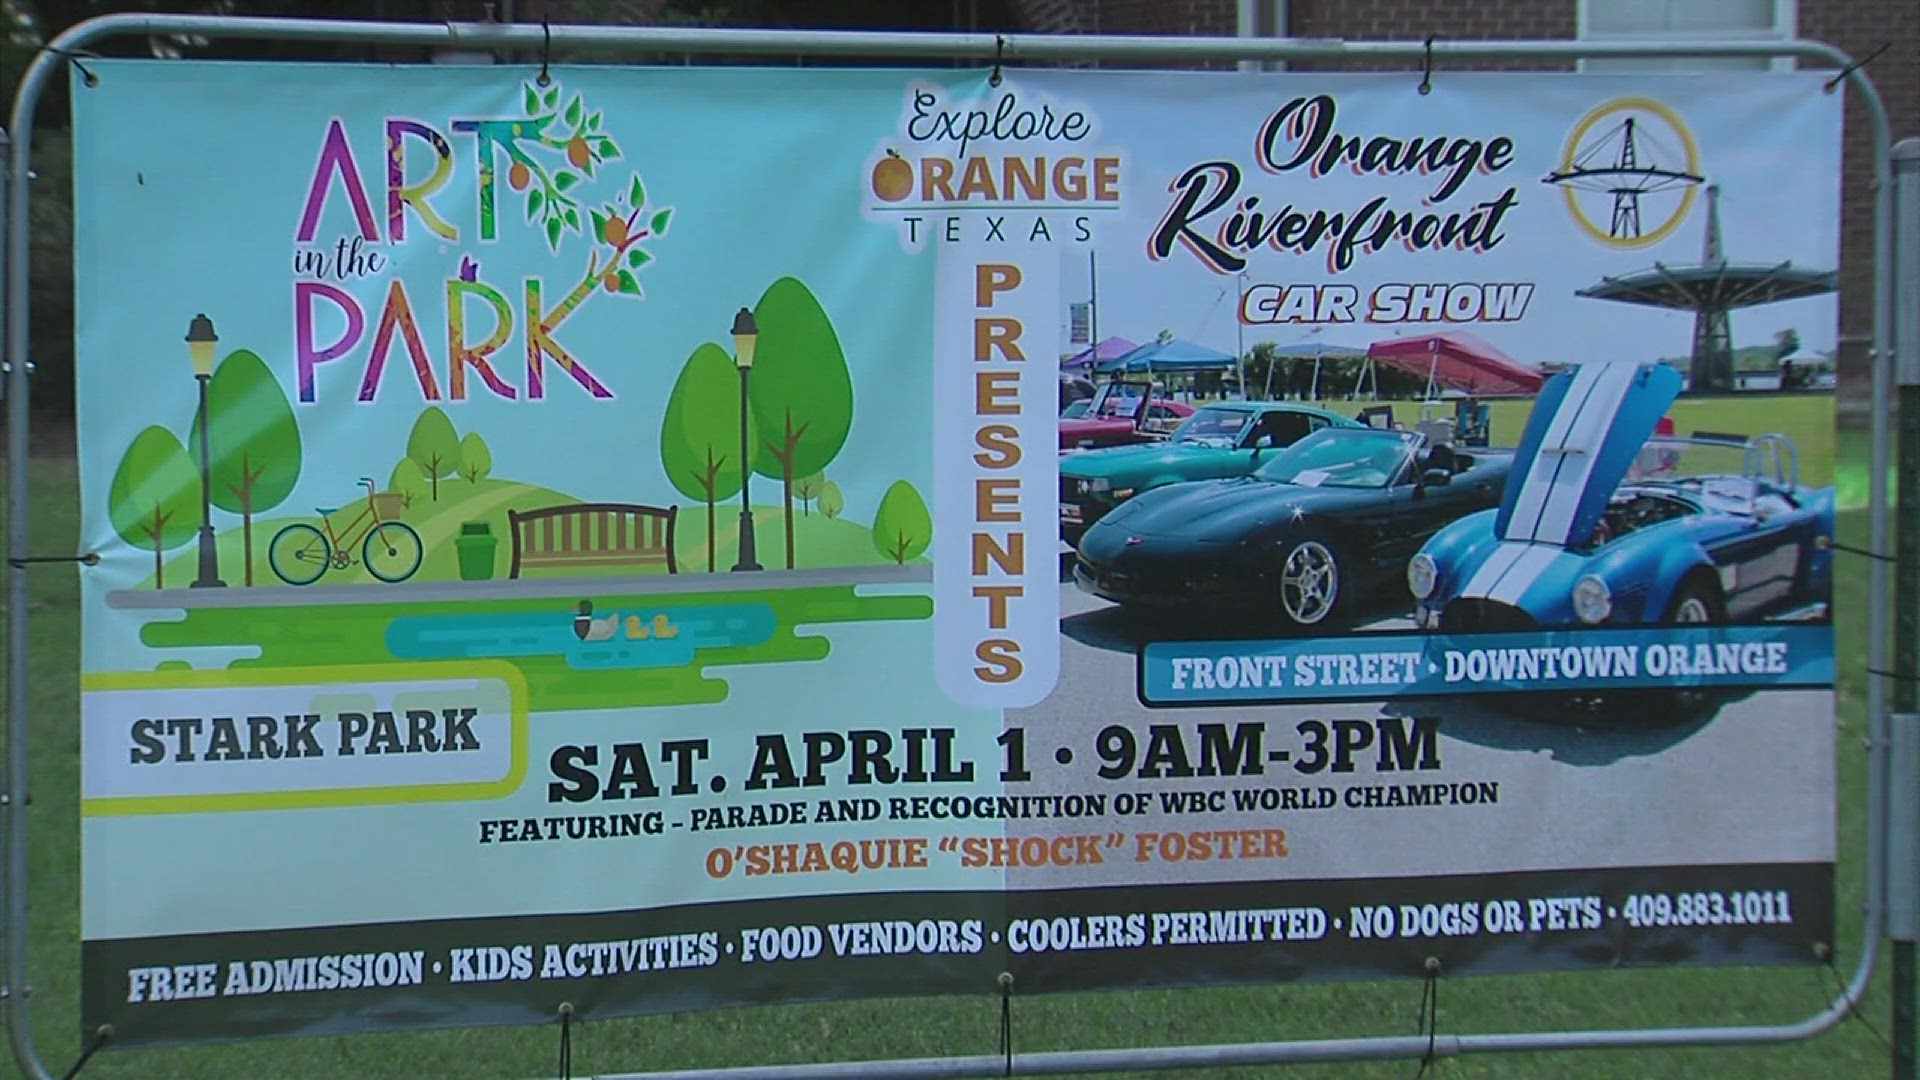 The City of Orange has several free events set for Saturday that offer a good time for the whole family from a parade to an art show and a car show.